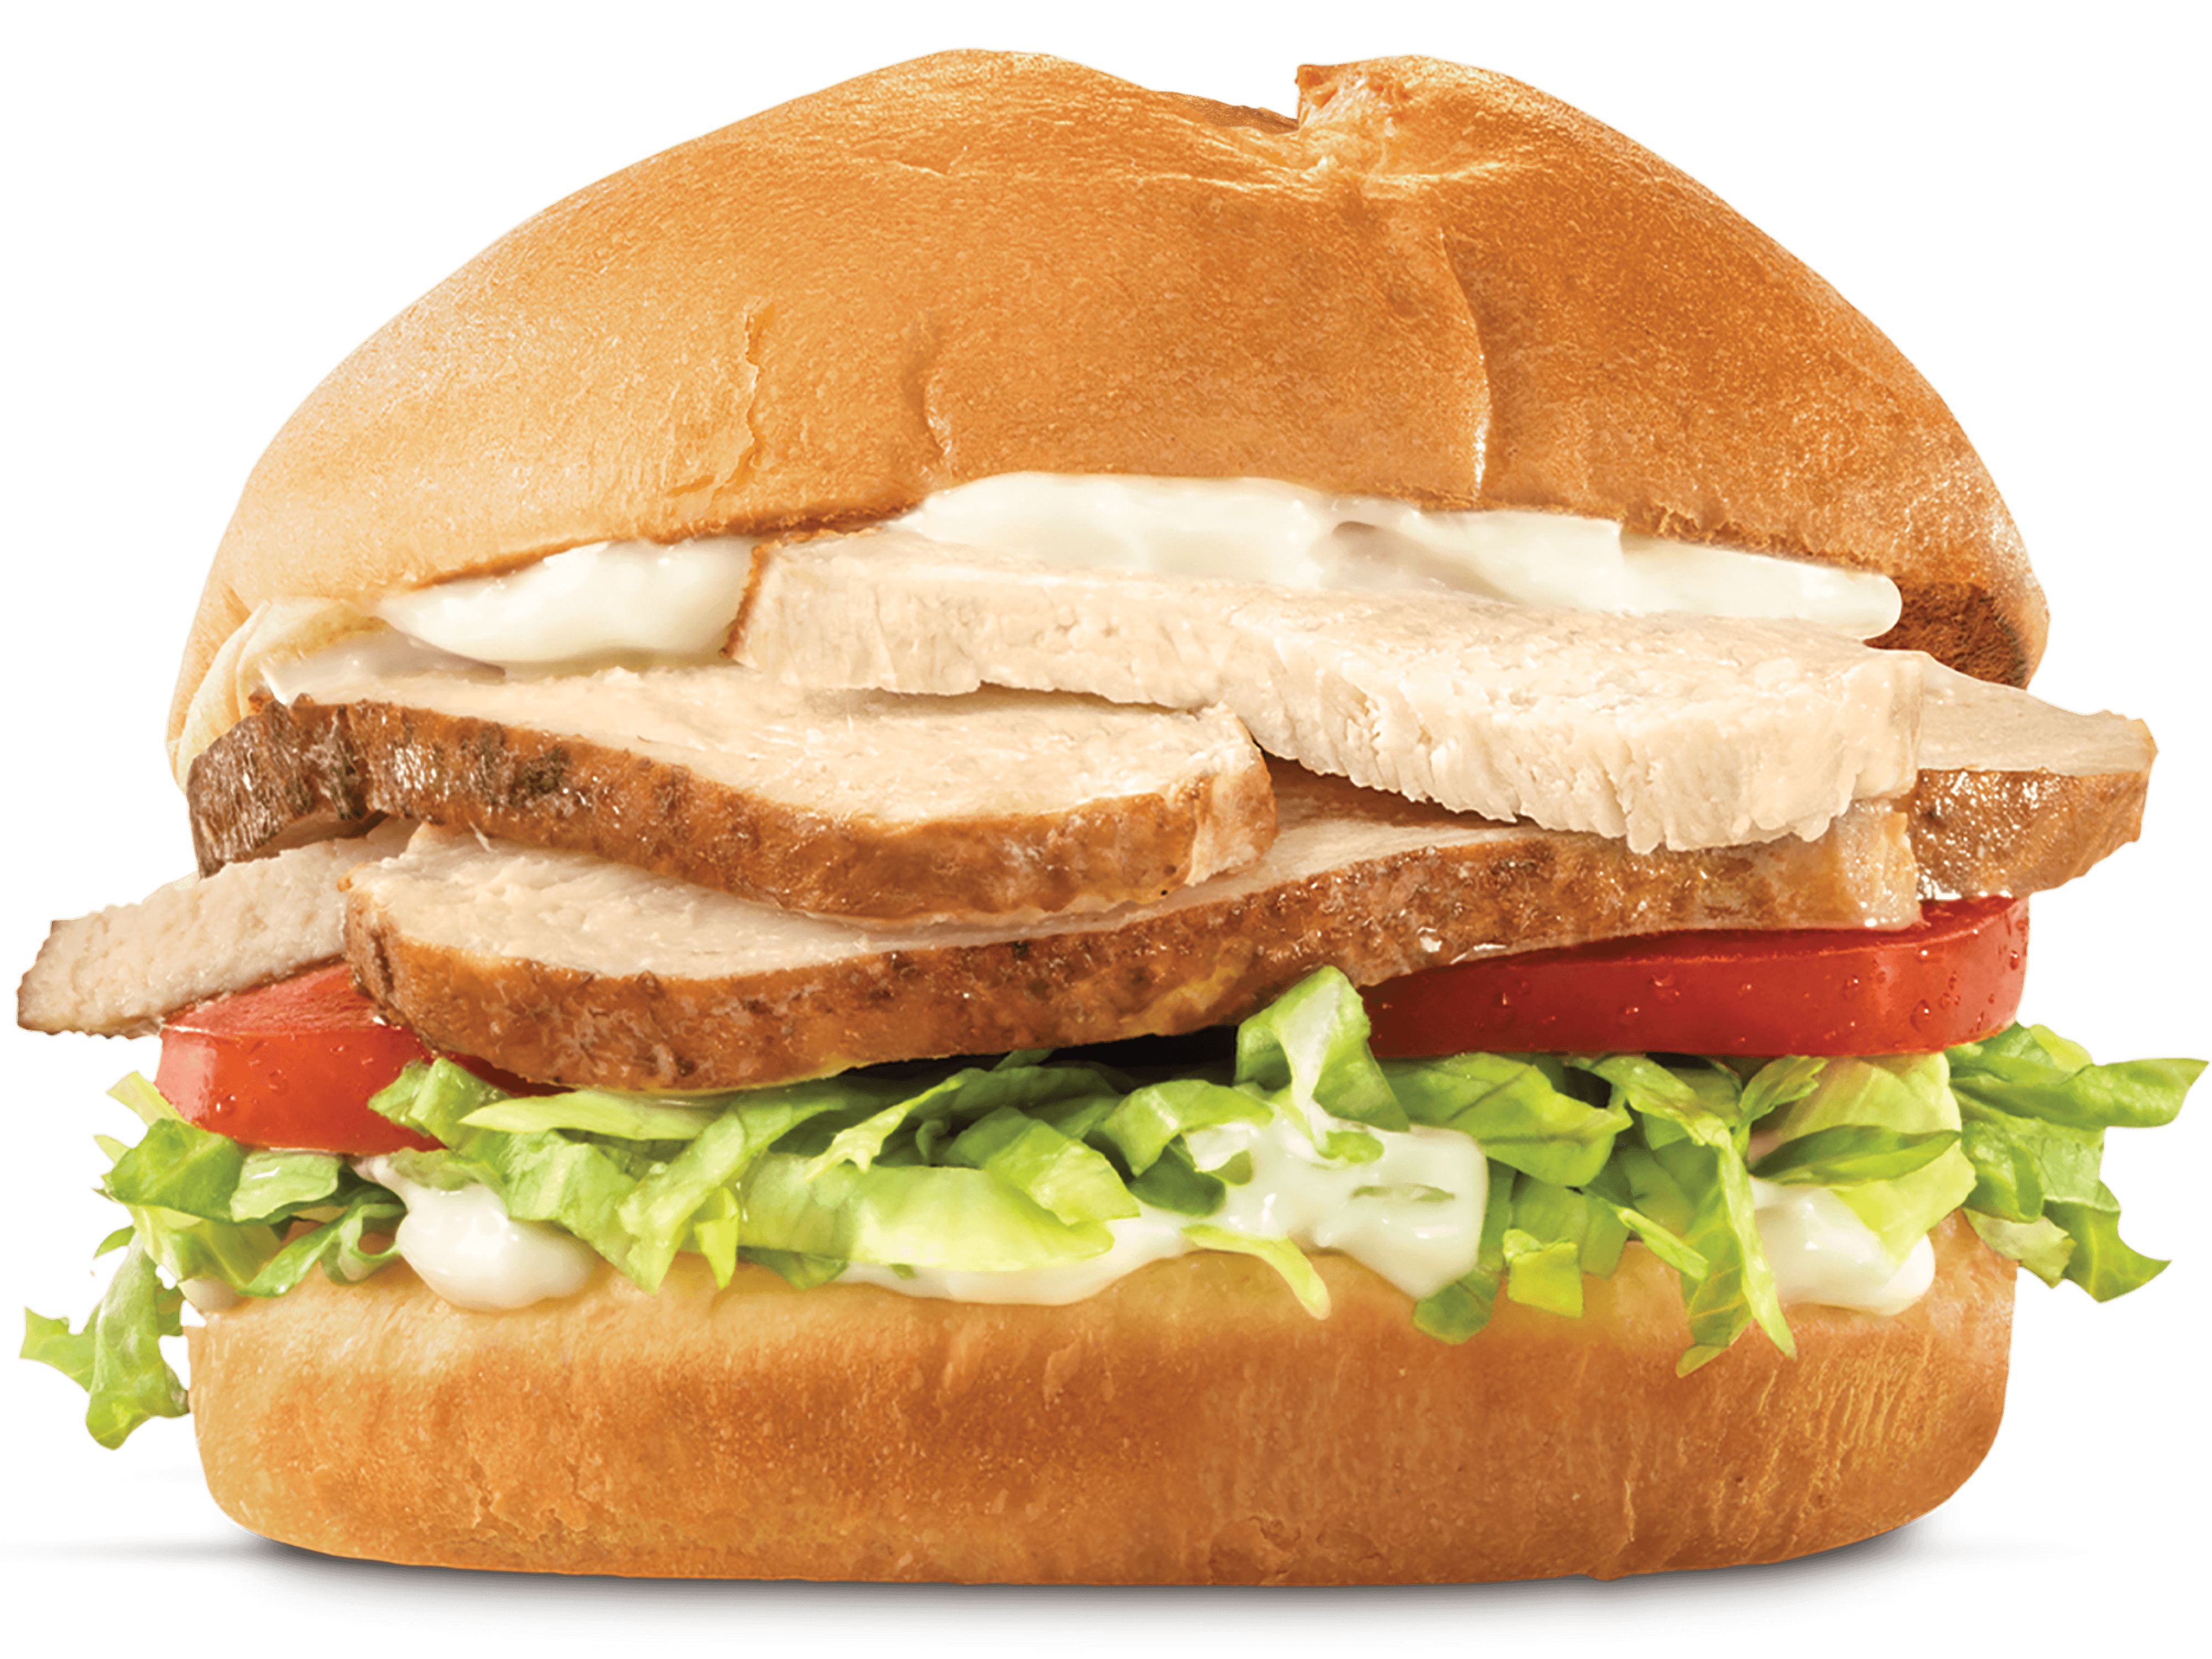 Calories in Arby's Classic Roast Chicken